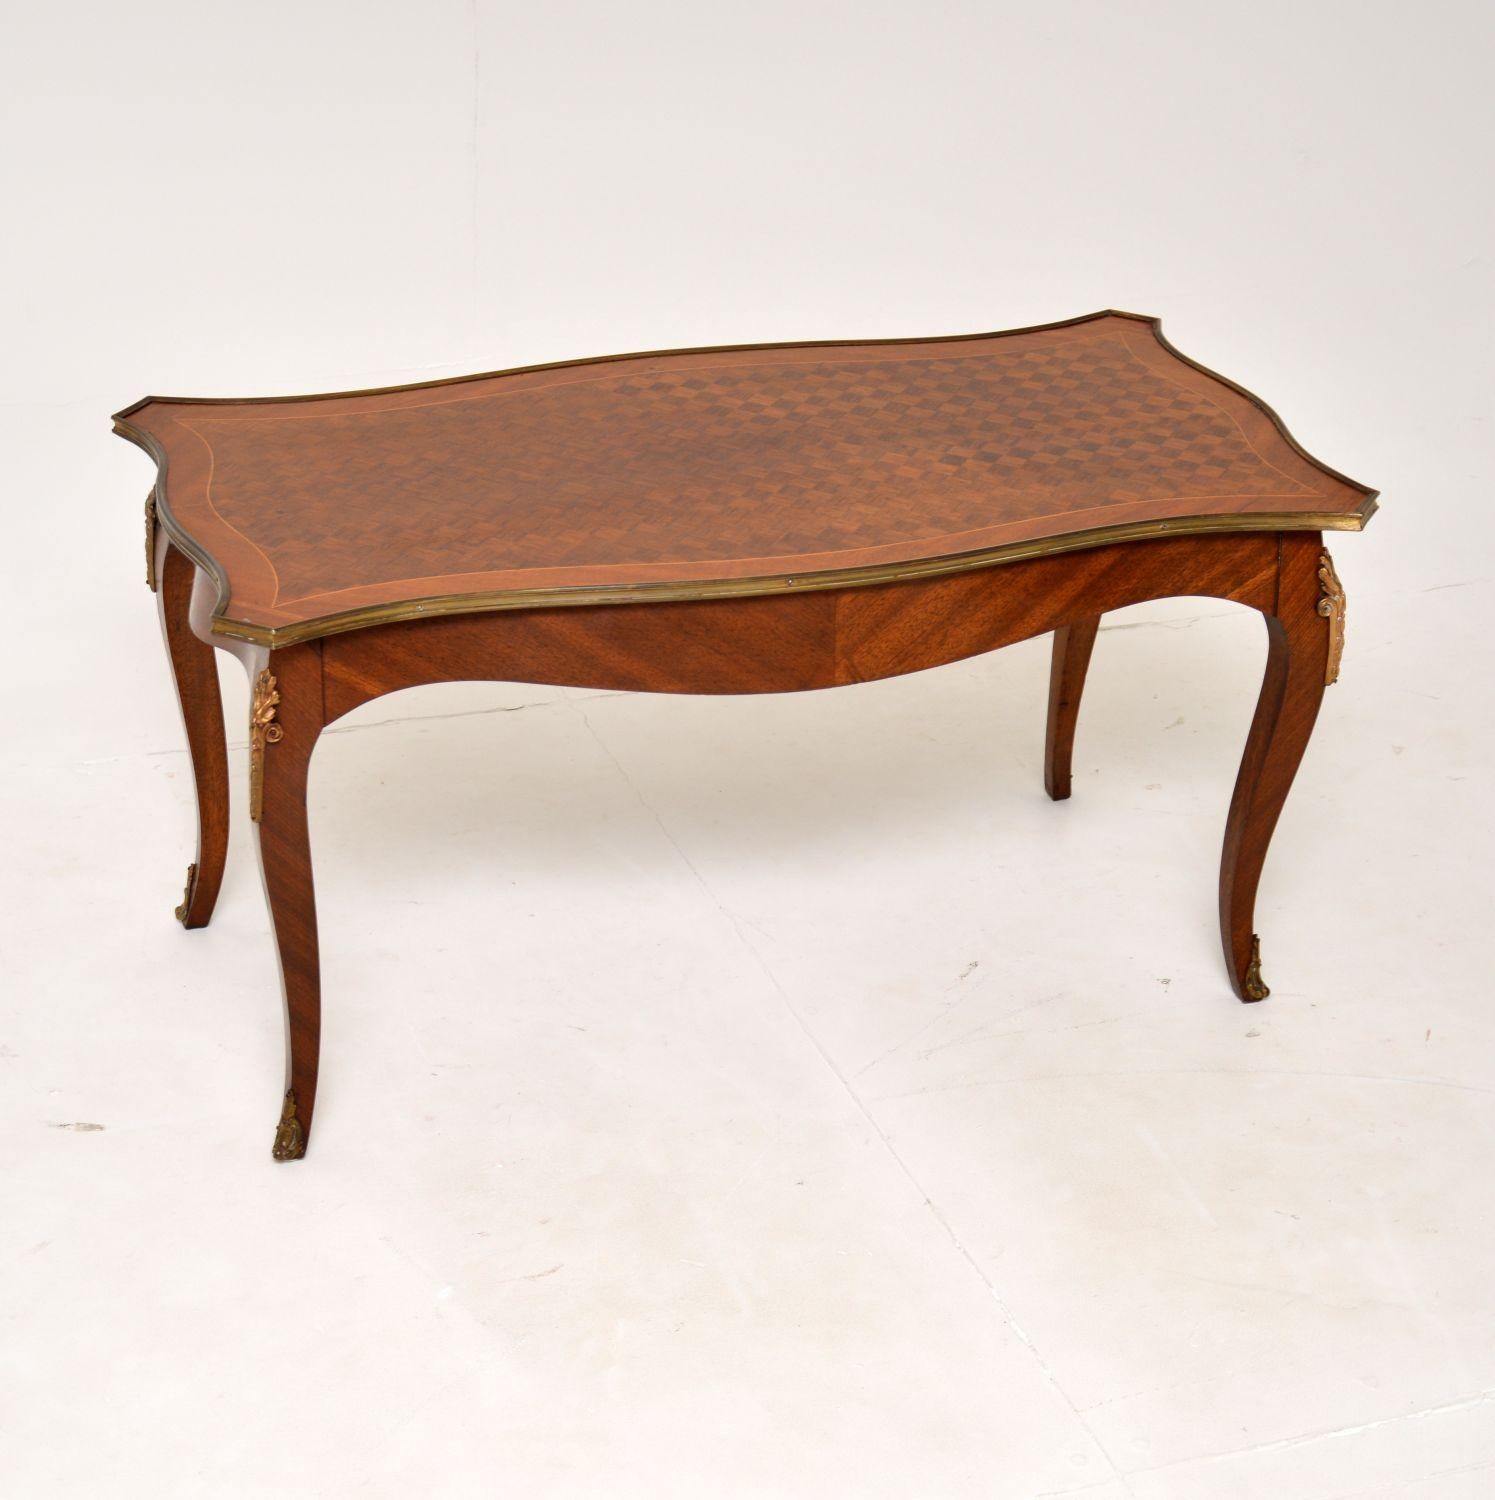 A very beautiful and elegant antique French coffee table, this dates from around the 1930’s.

It is of superb quality, with gorgeous parquetry inlay on the top and a solid wood frame. There are high quality ormolu mounts on the edges, knees and